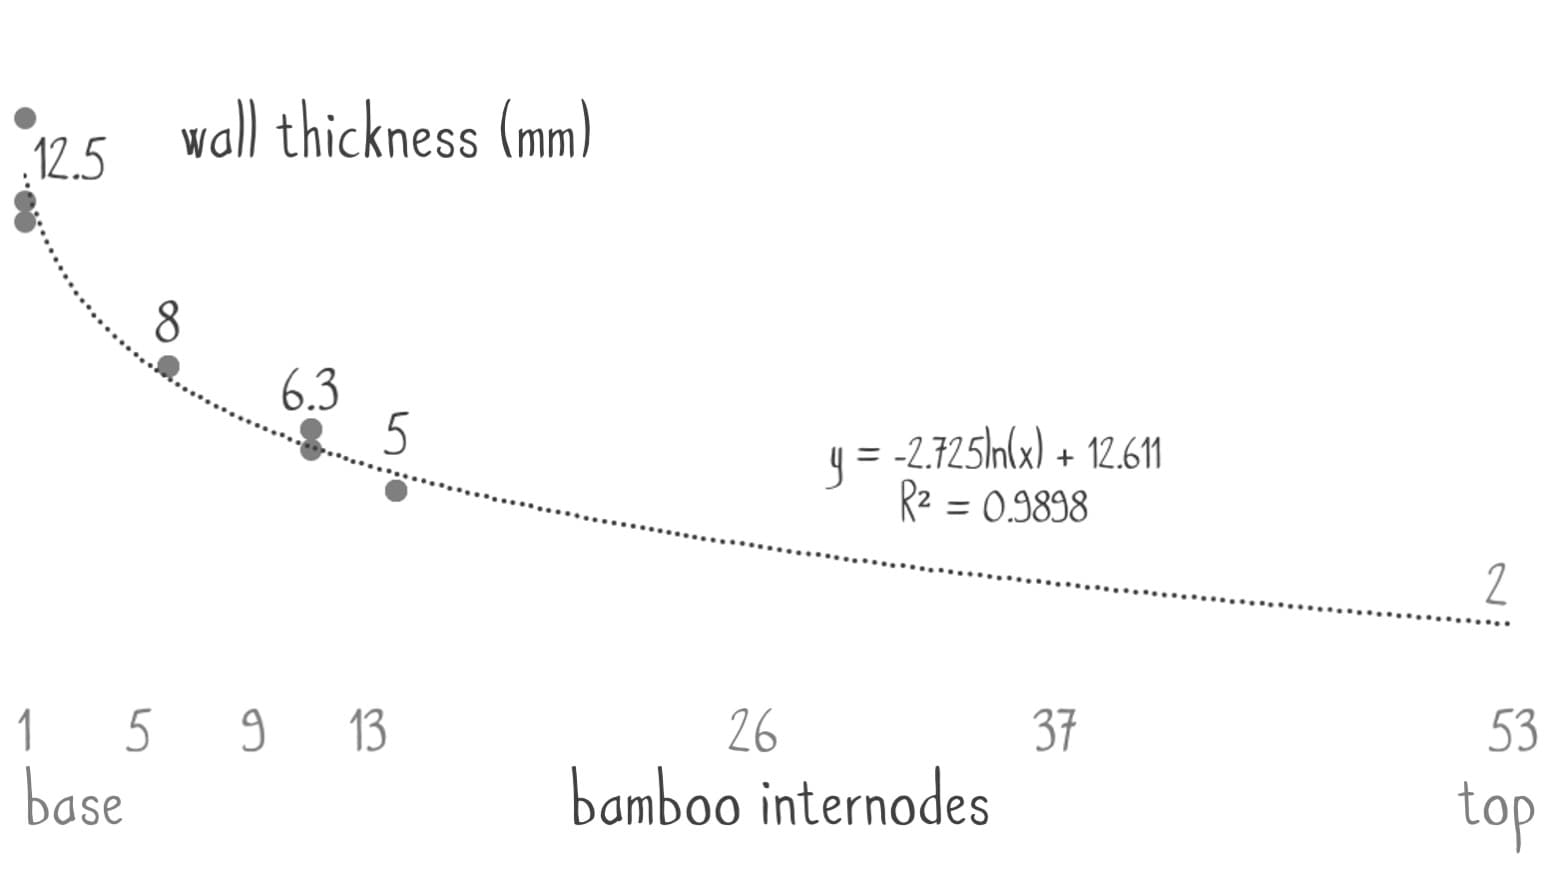 bamboo-internode-thickness-curve.jpg.pagespeed.ce.zyhgVHipFk.jpg